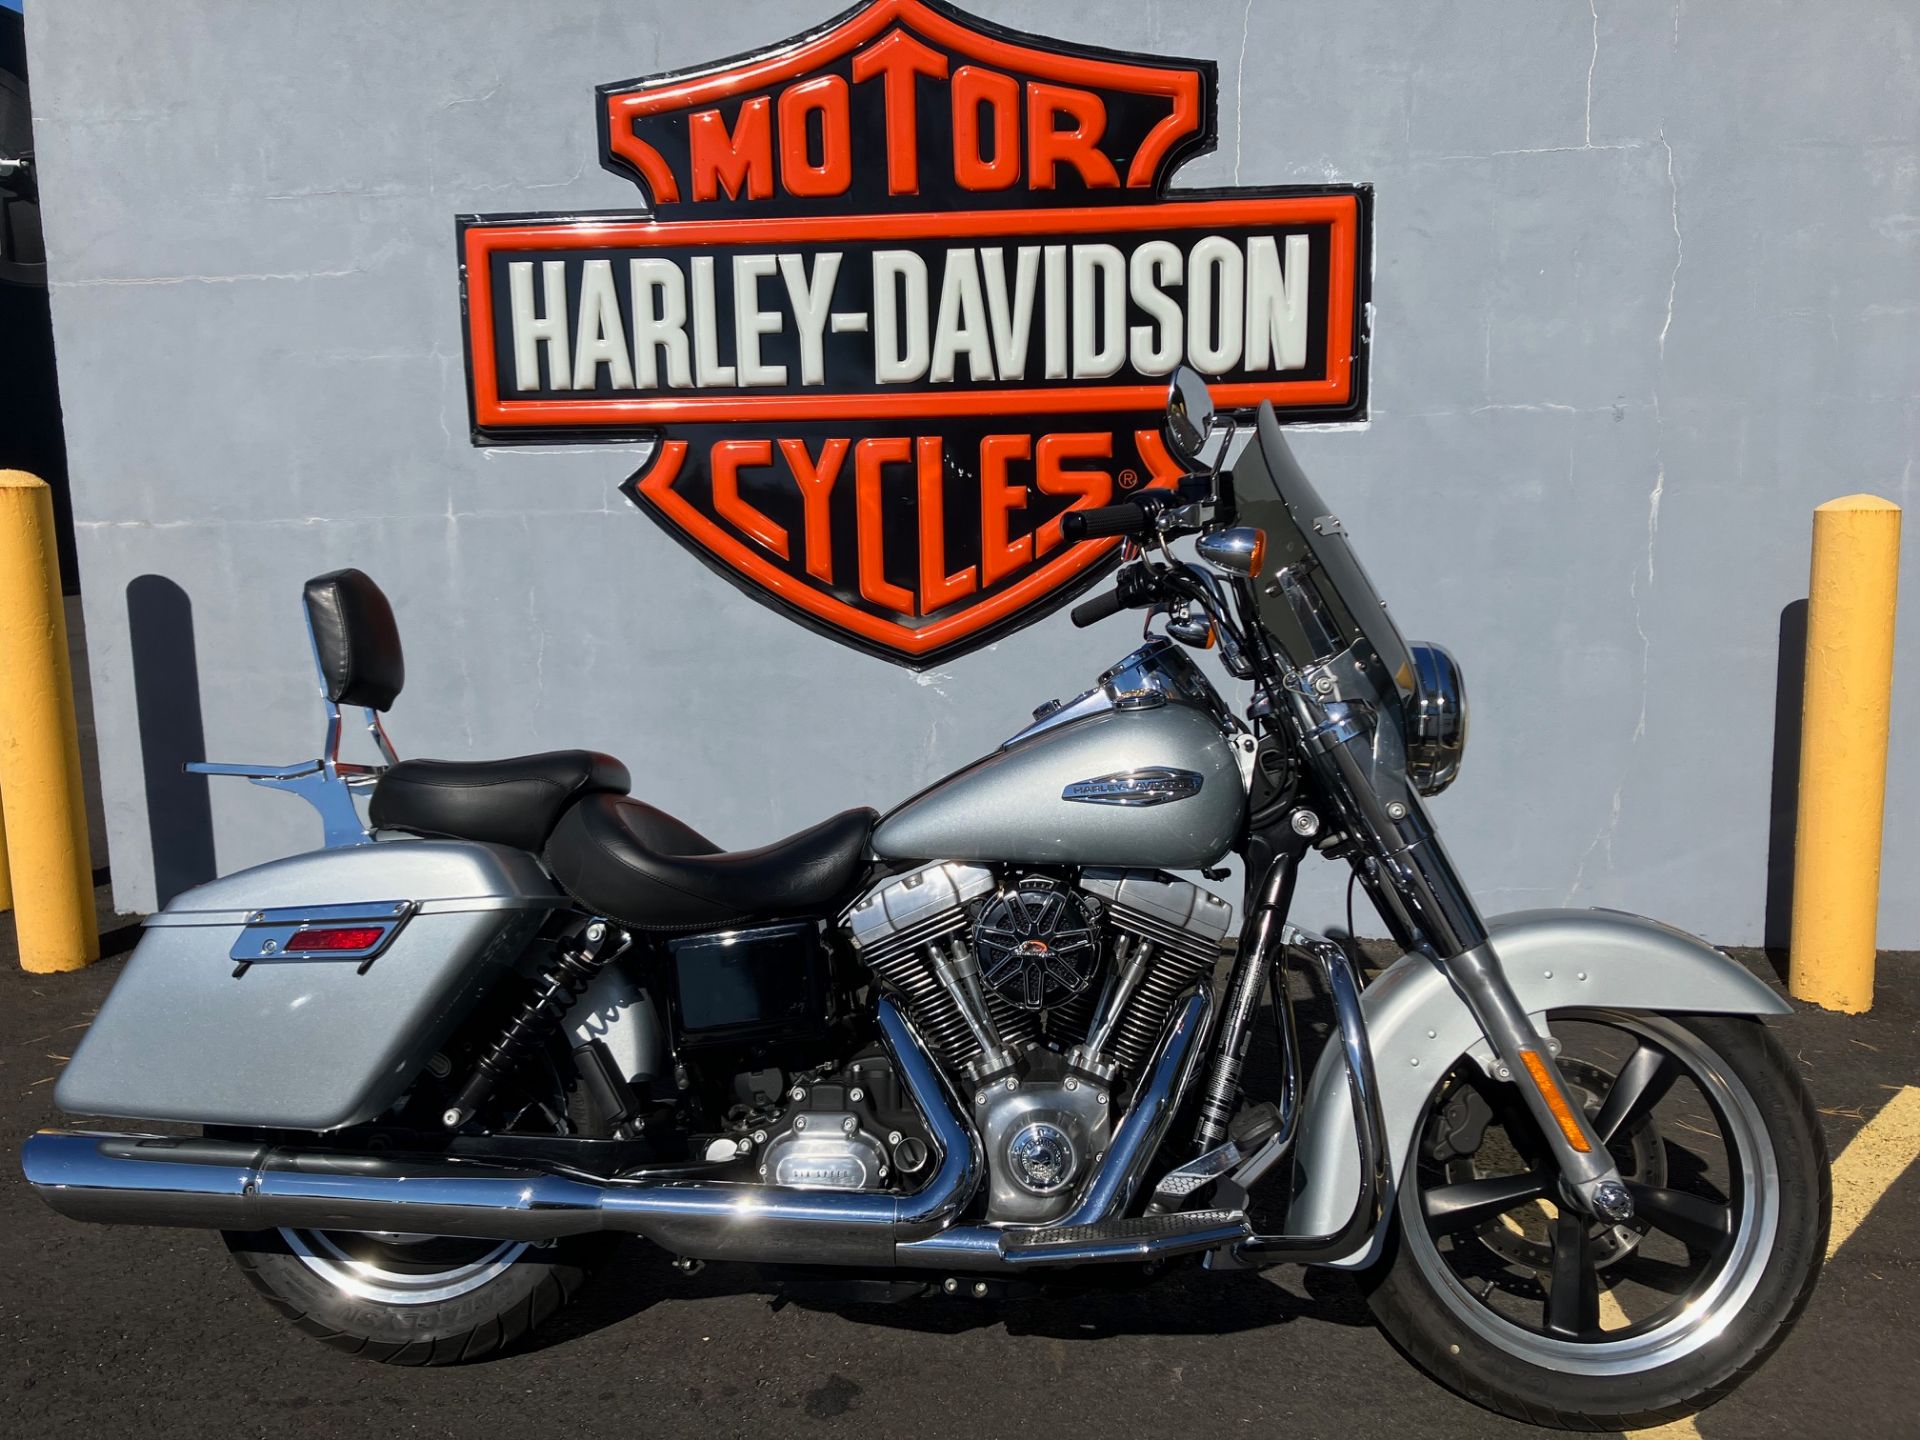 2011 Harley-Davidson SWITCHBACK in West Long Branch, New Jersey - Photo 1